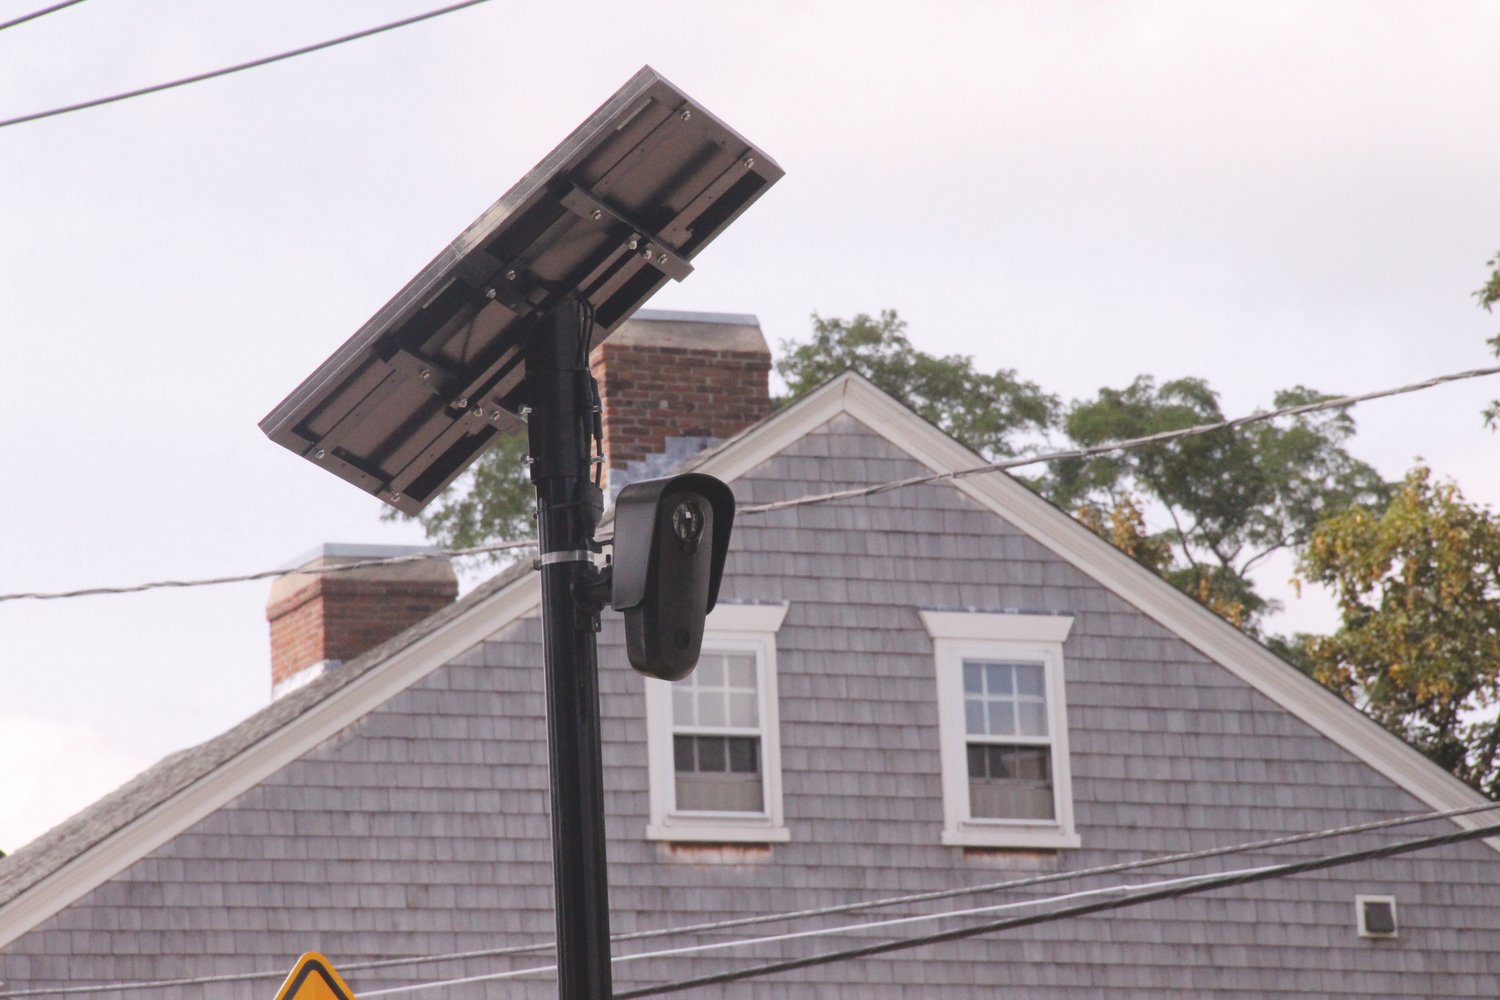 KEEPING AN EYE OUT: The license plate reading cameras from Flock Safety, like this one in Pawtuxet Village, were
the subject of Monday’s special City Council meeting. (Herald file photo)